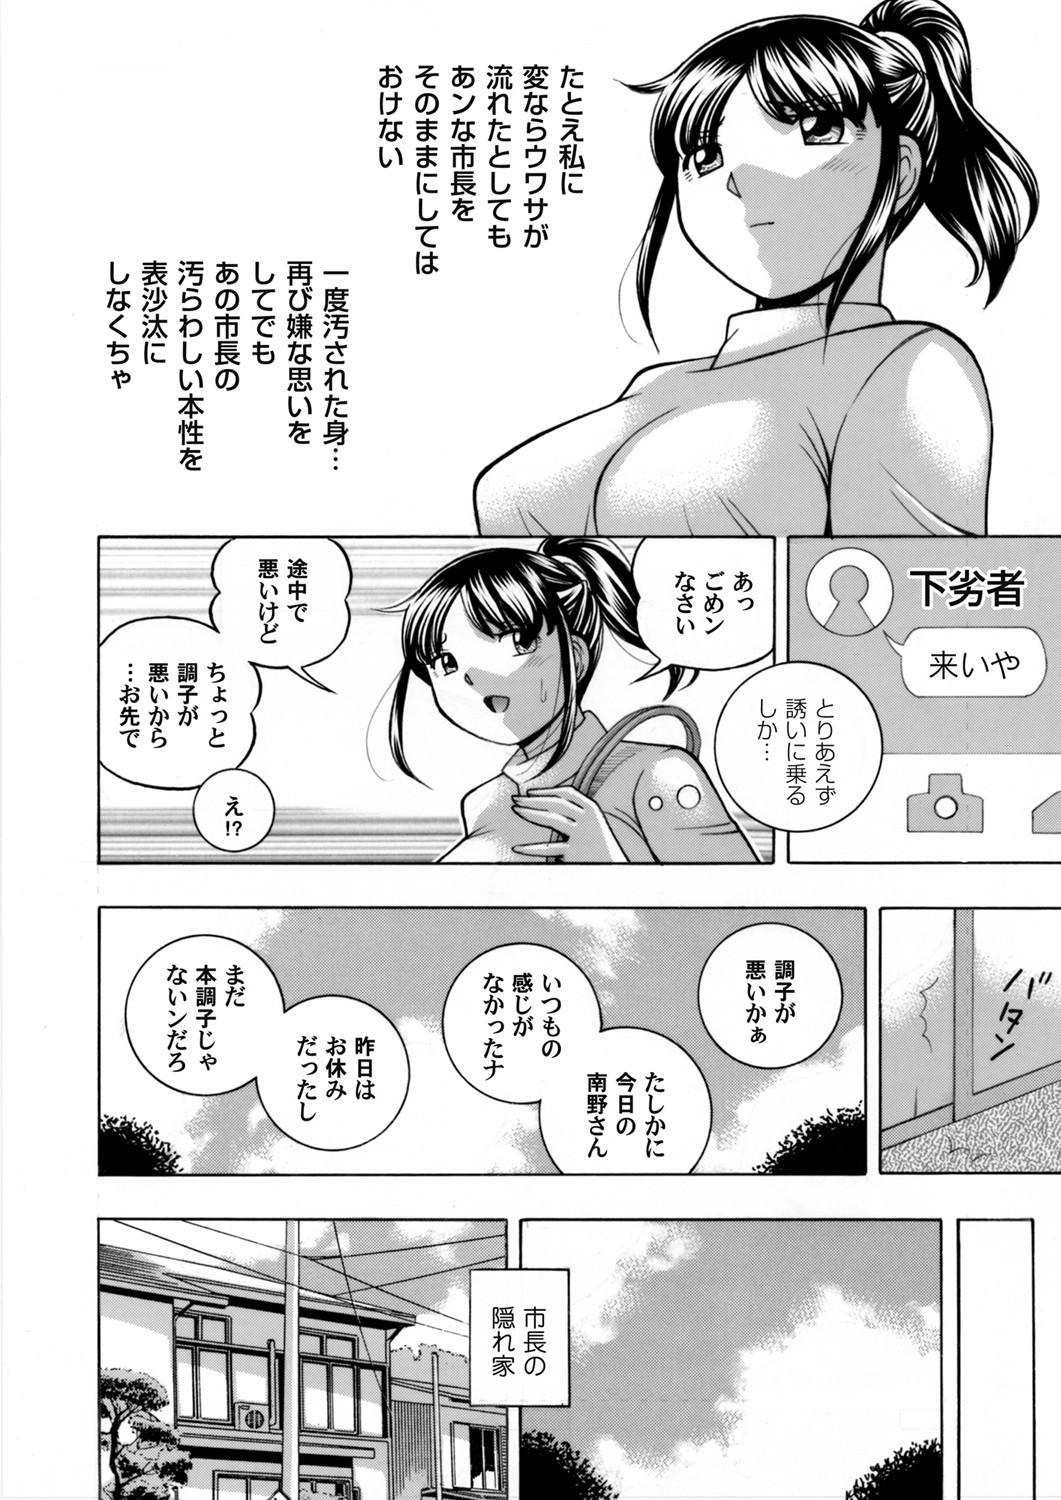 Real Amateur コミックマグナム Vol.138 Free - Page 7